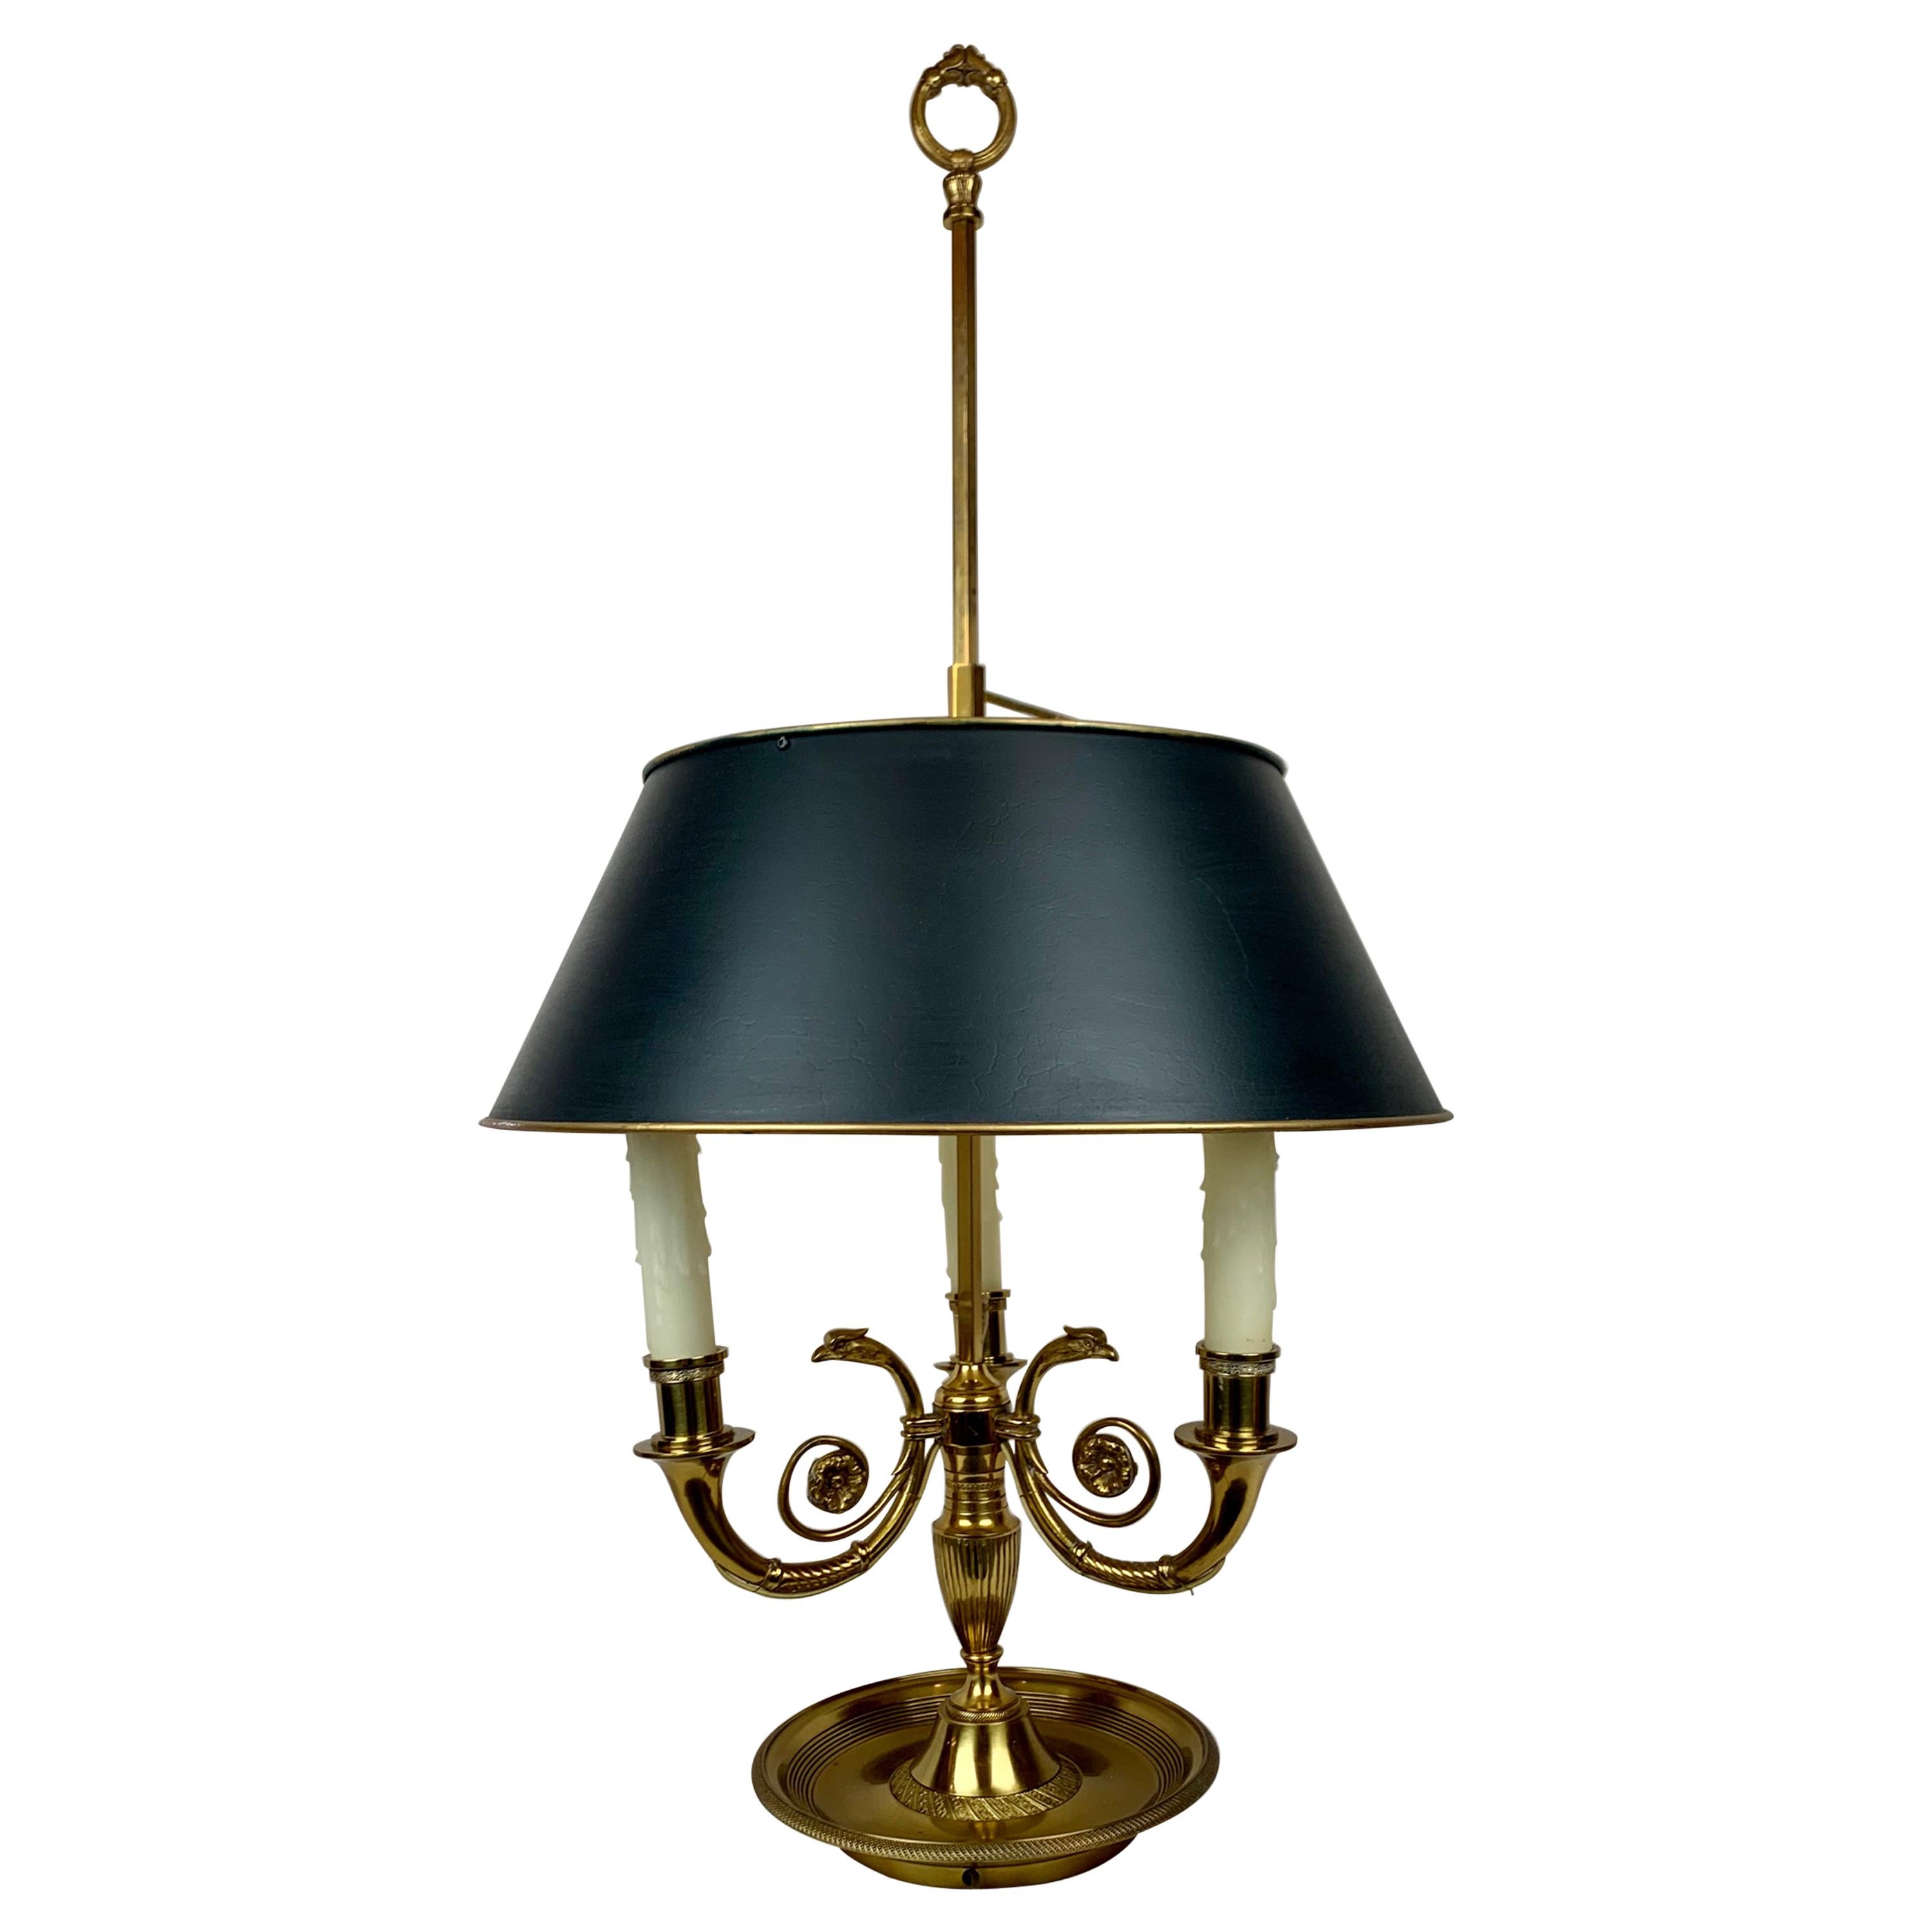 Empire Bouillotte Lamp in Bronze with Black Tôle Shade with Three Lights